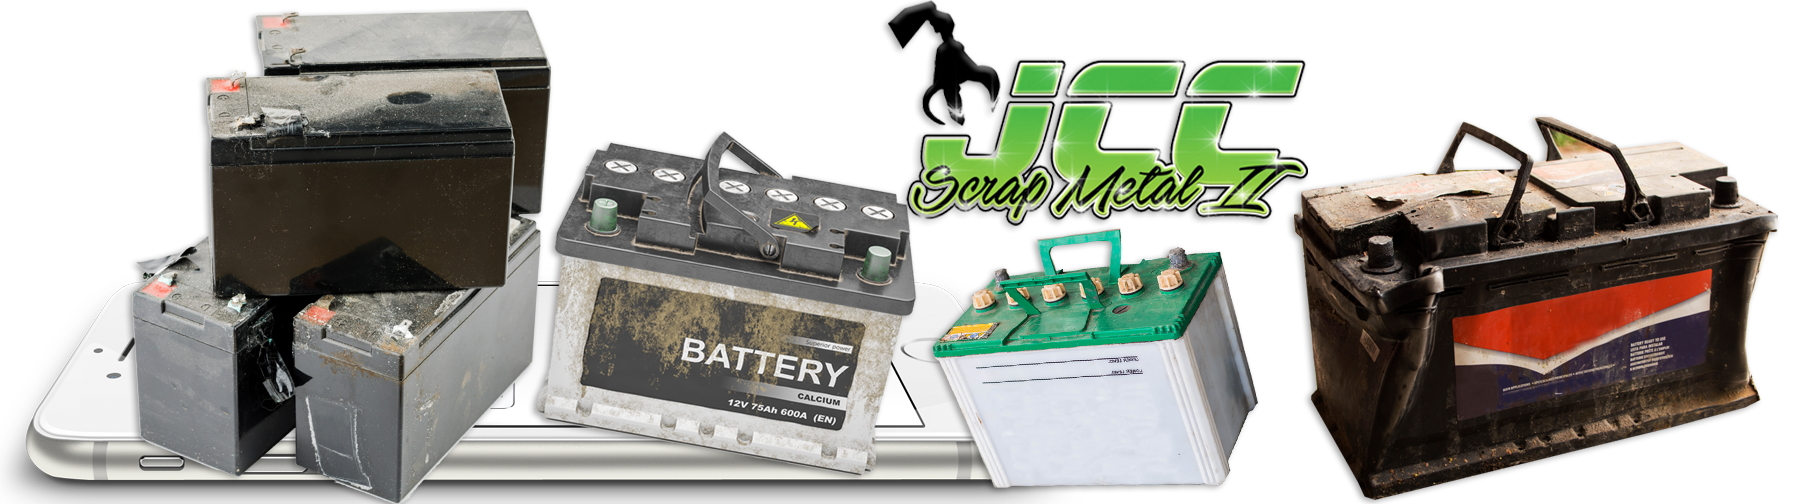 Batteries,Scrap Metal Recycling Professional Services, Lindenhurst, NY - Graphic | Suffolk County, Long Island, NY | JCC Scrap Metal II, 631-816-2000, jccscrapmetal2@gmail.com